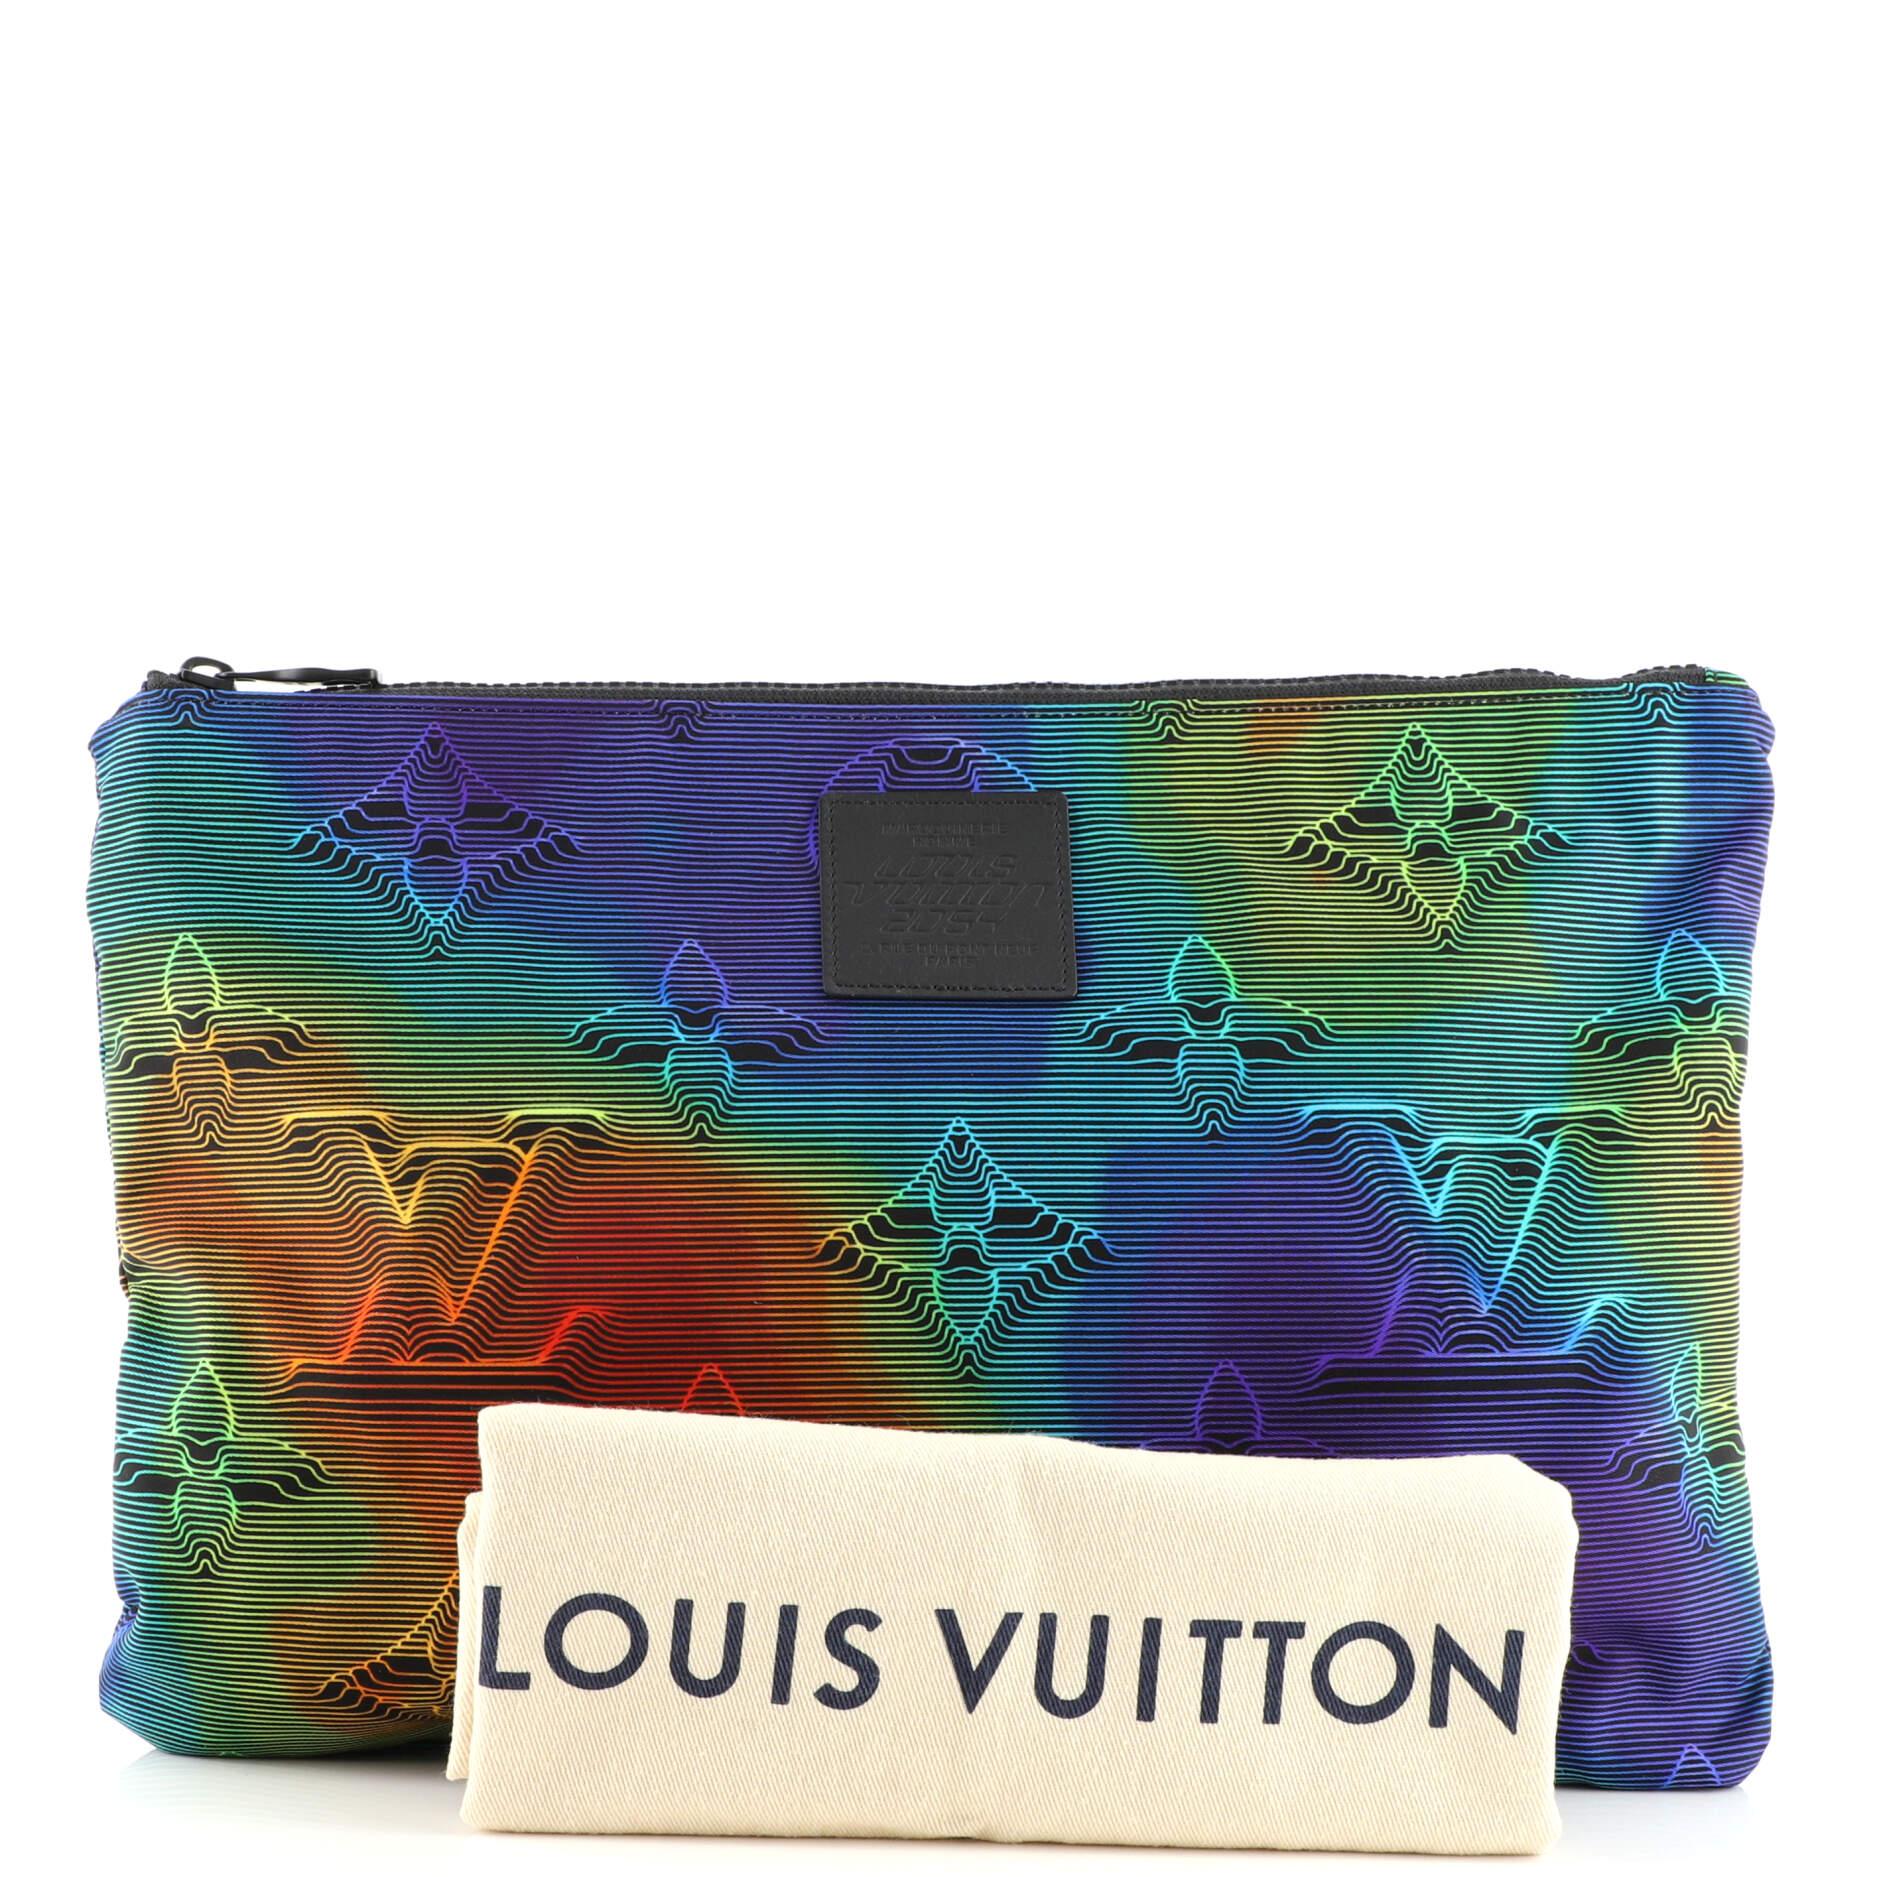 Louis Vuitton 2054 - 2 For Sale on 1stDibs